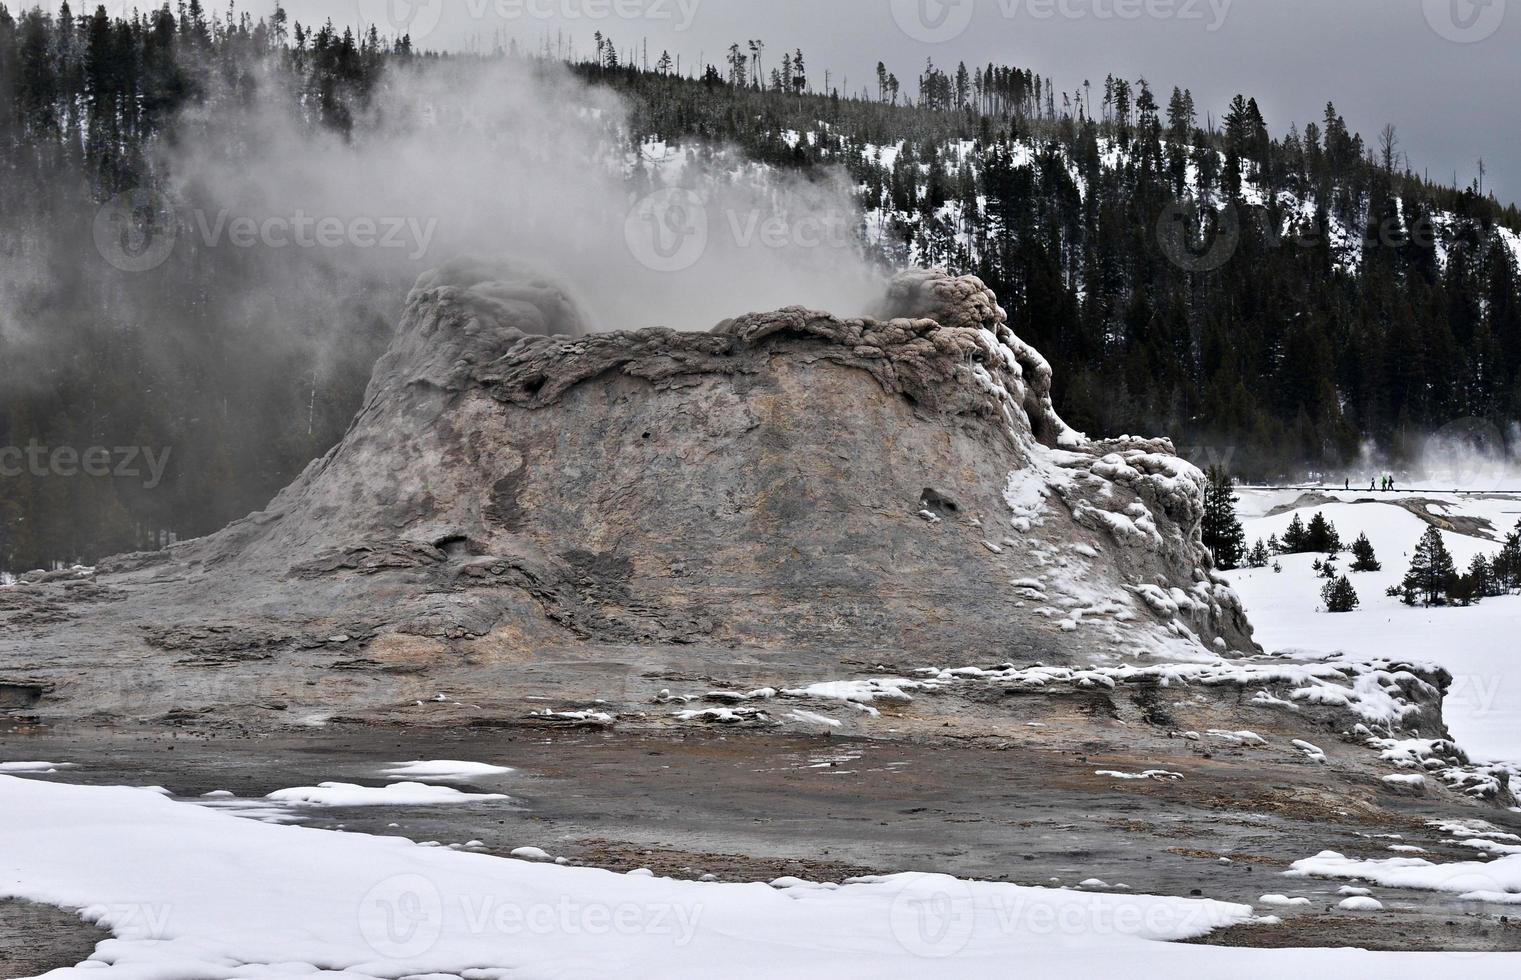 gejser i yellowstone nationell parkera foto